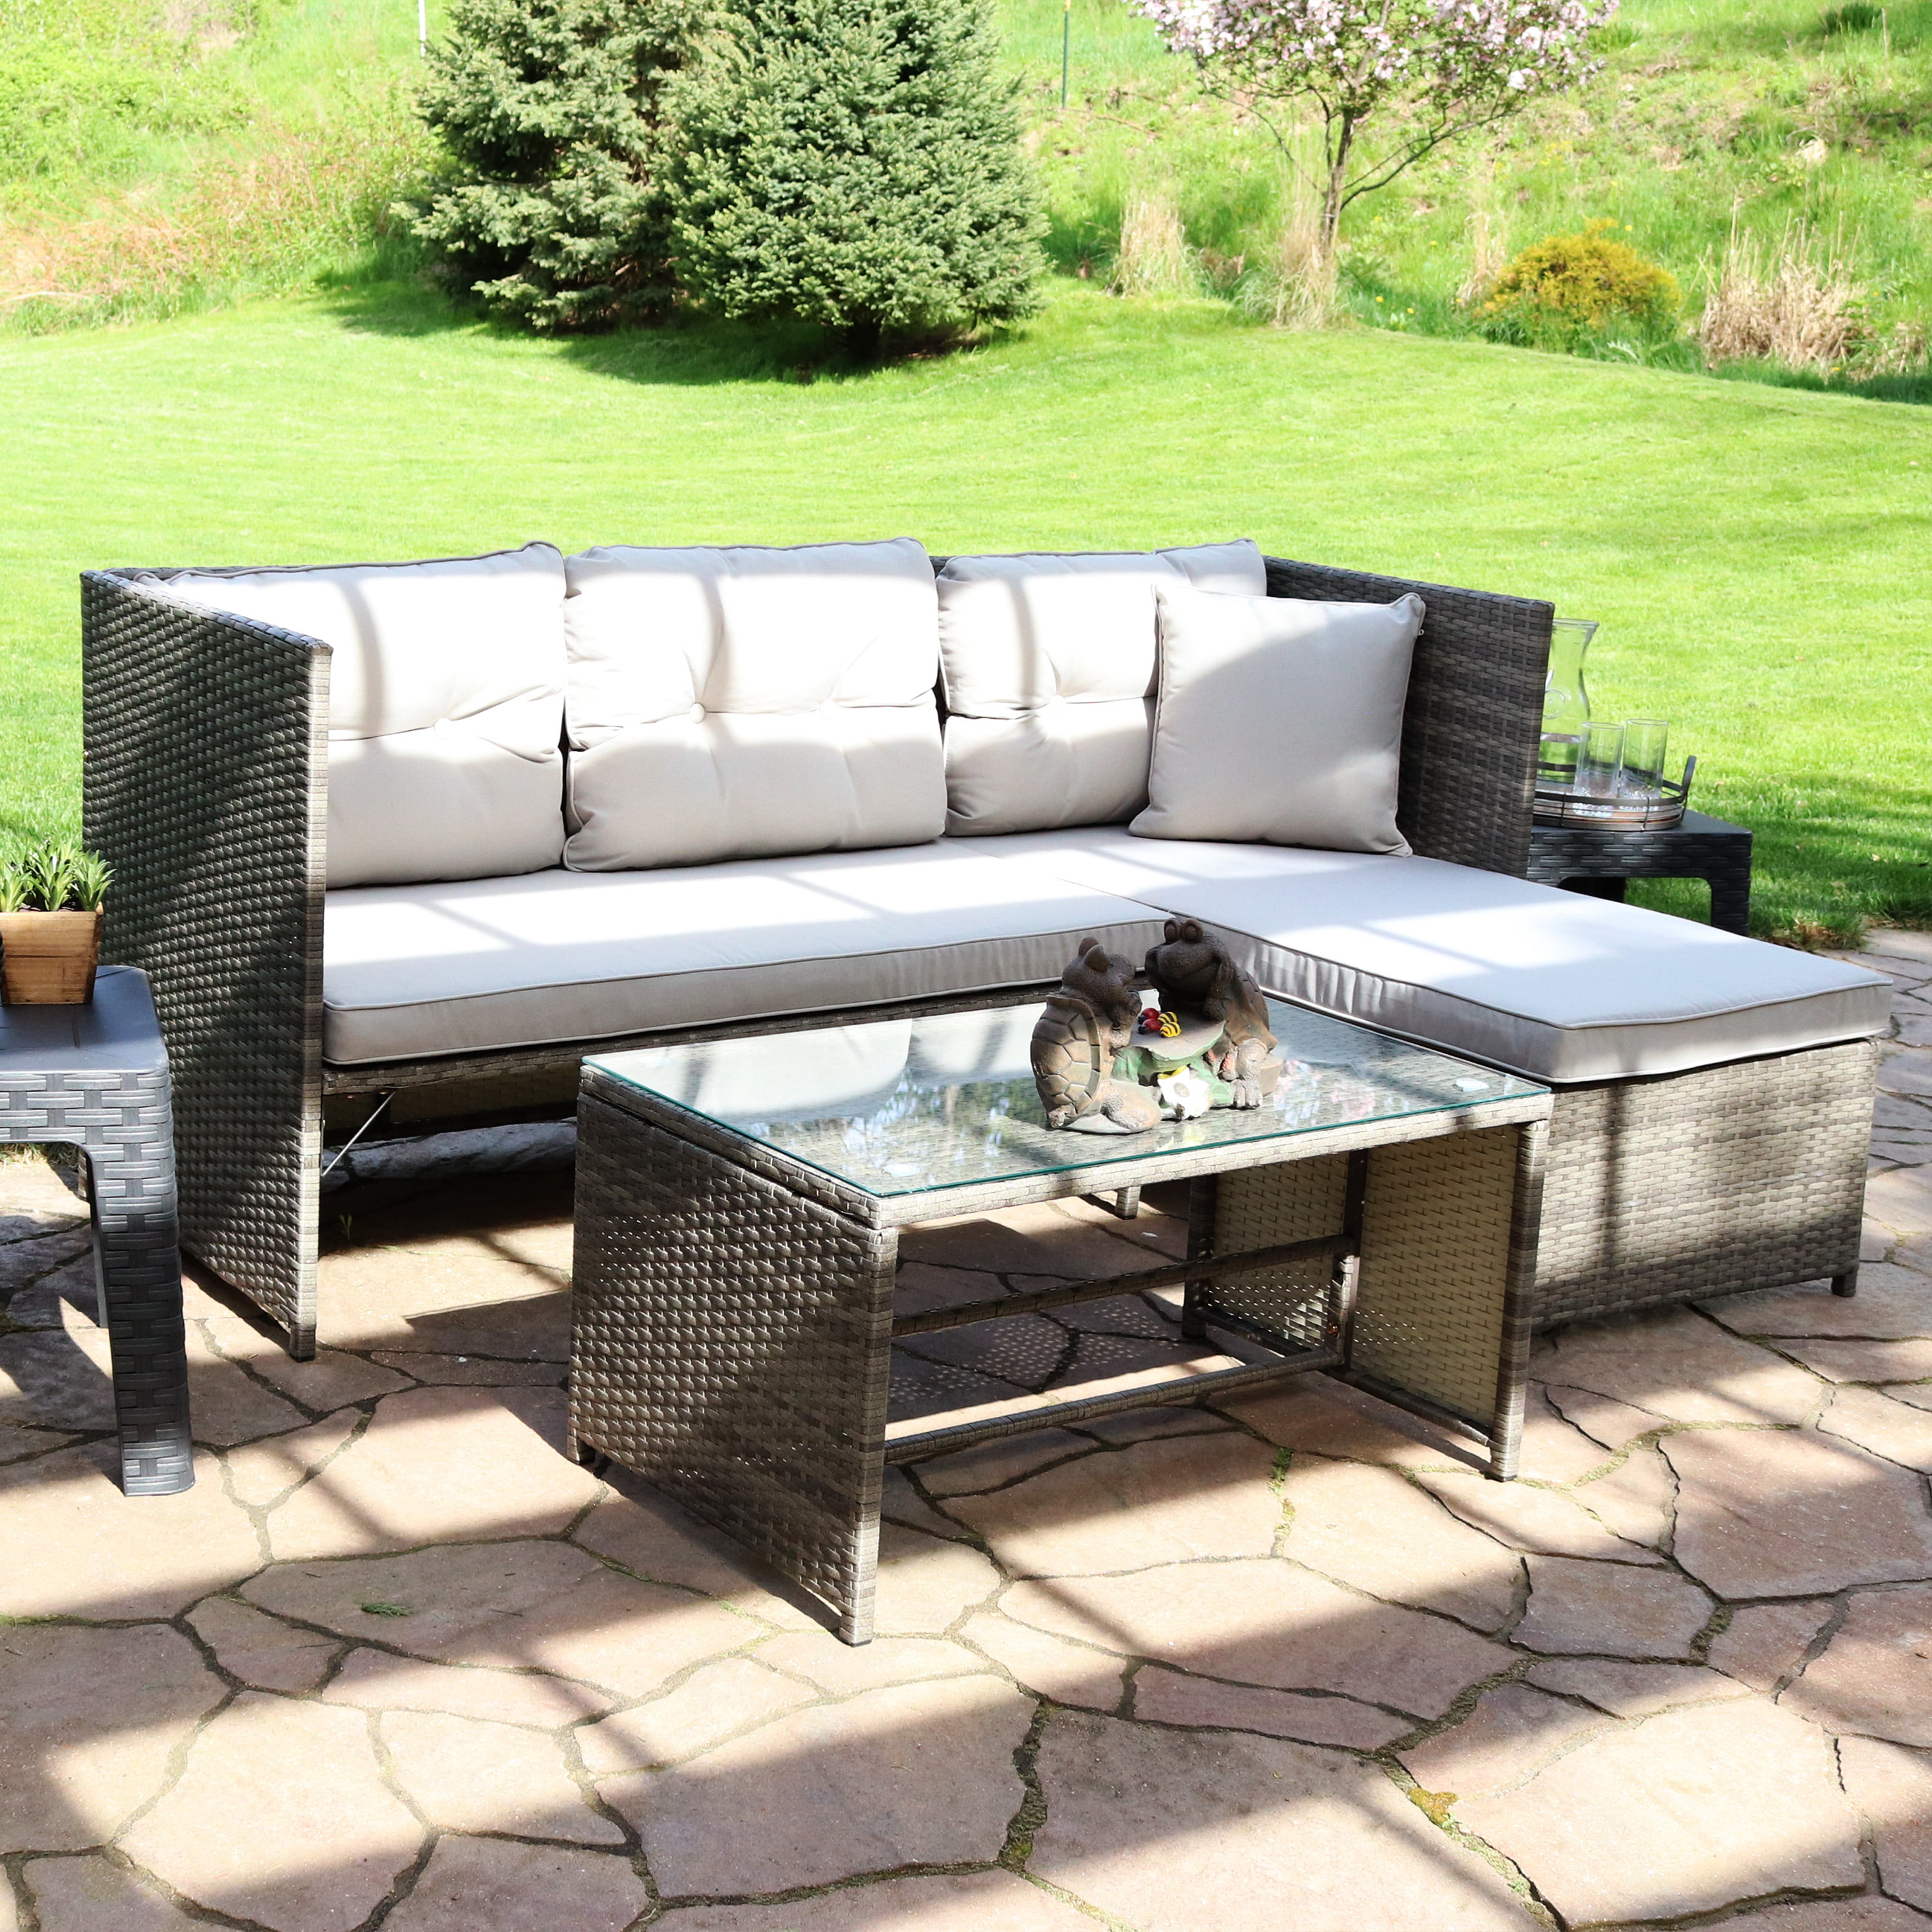 Sunnydaze Longford Outdoor Patio Sectional Sofa Set with Cushions - Stone Gray - image 2 of 12